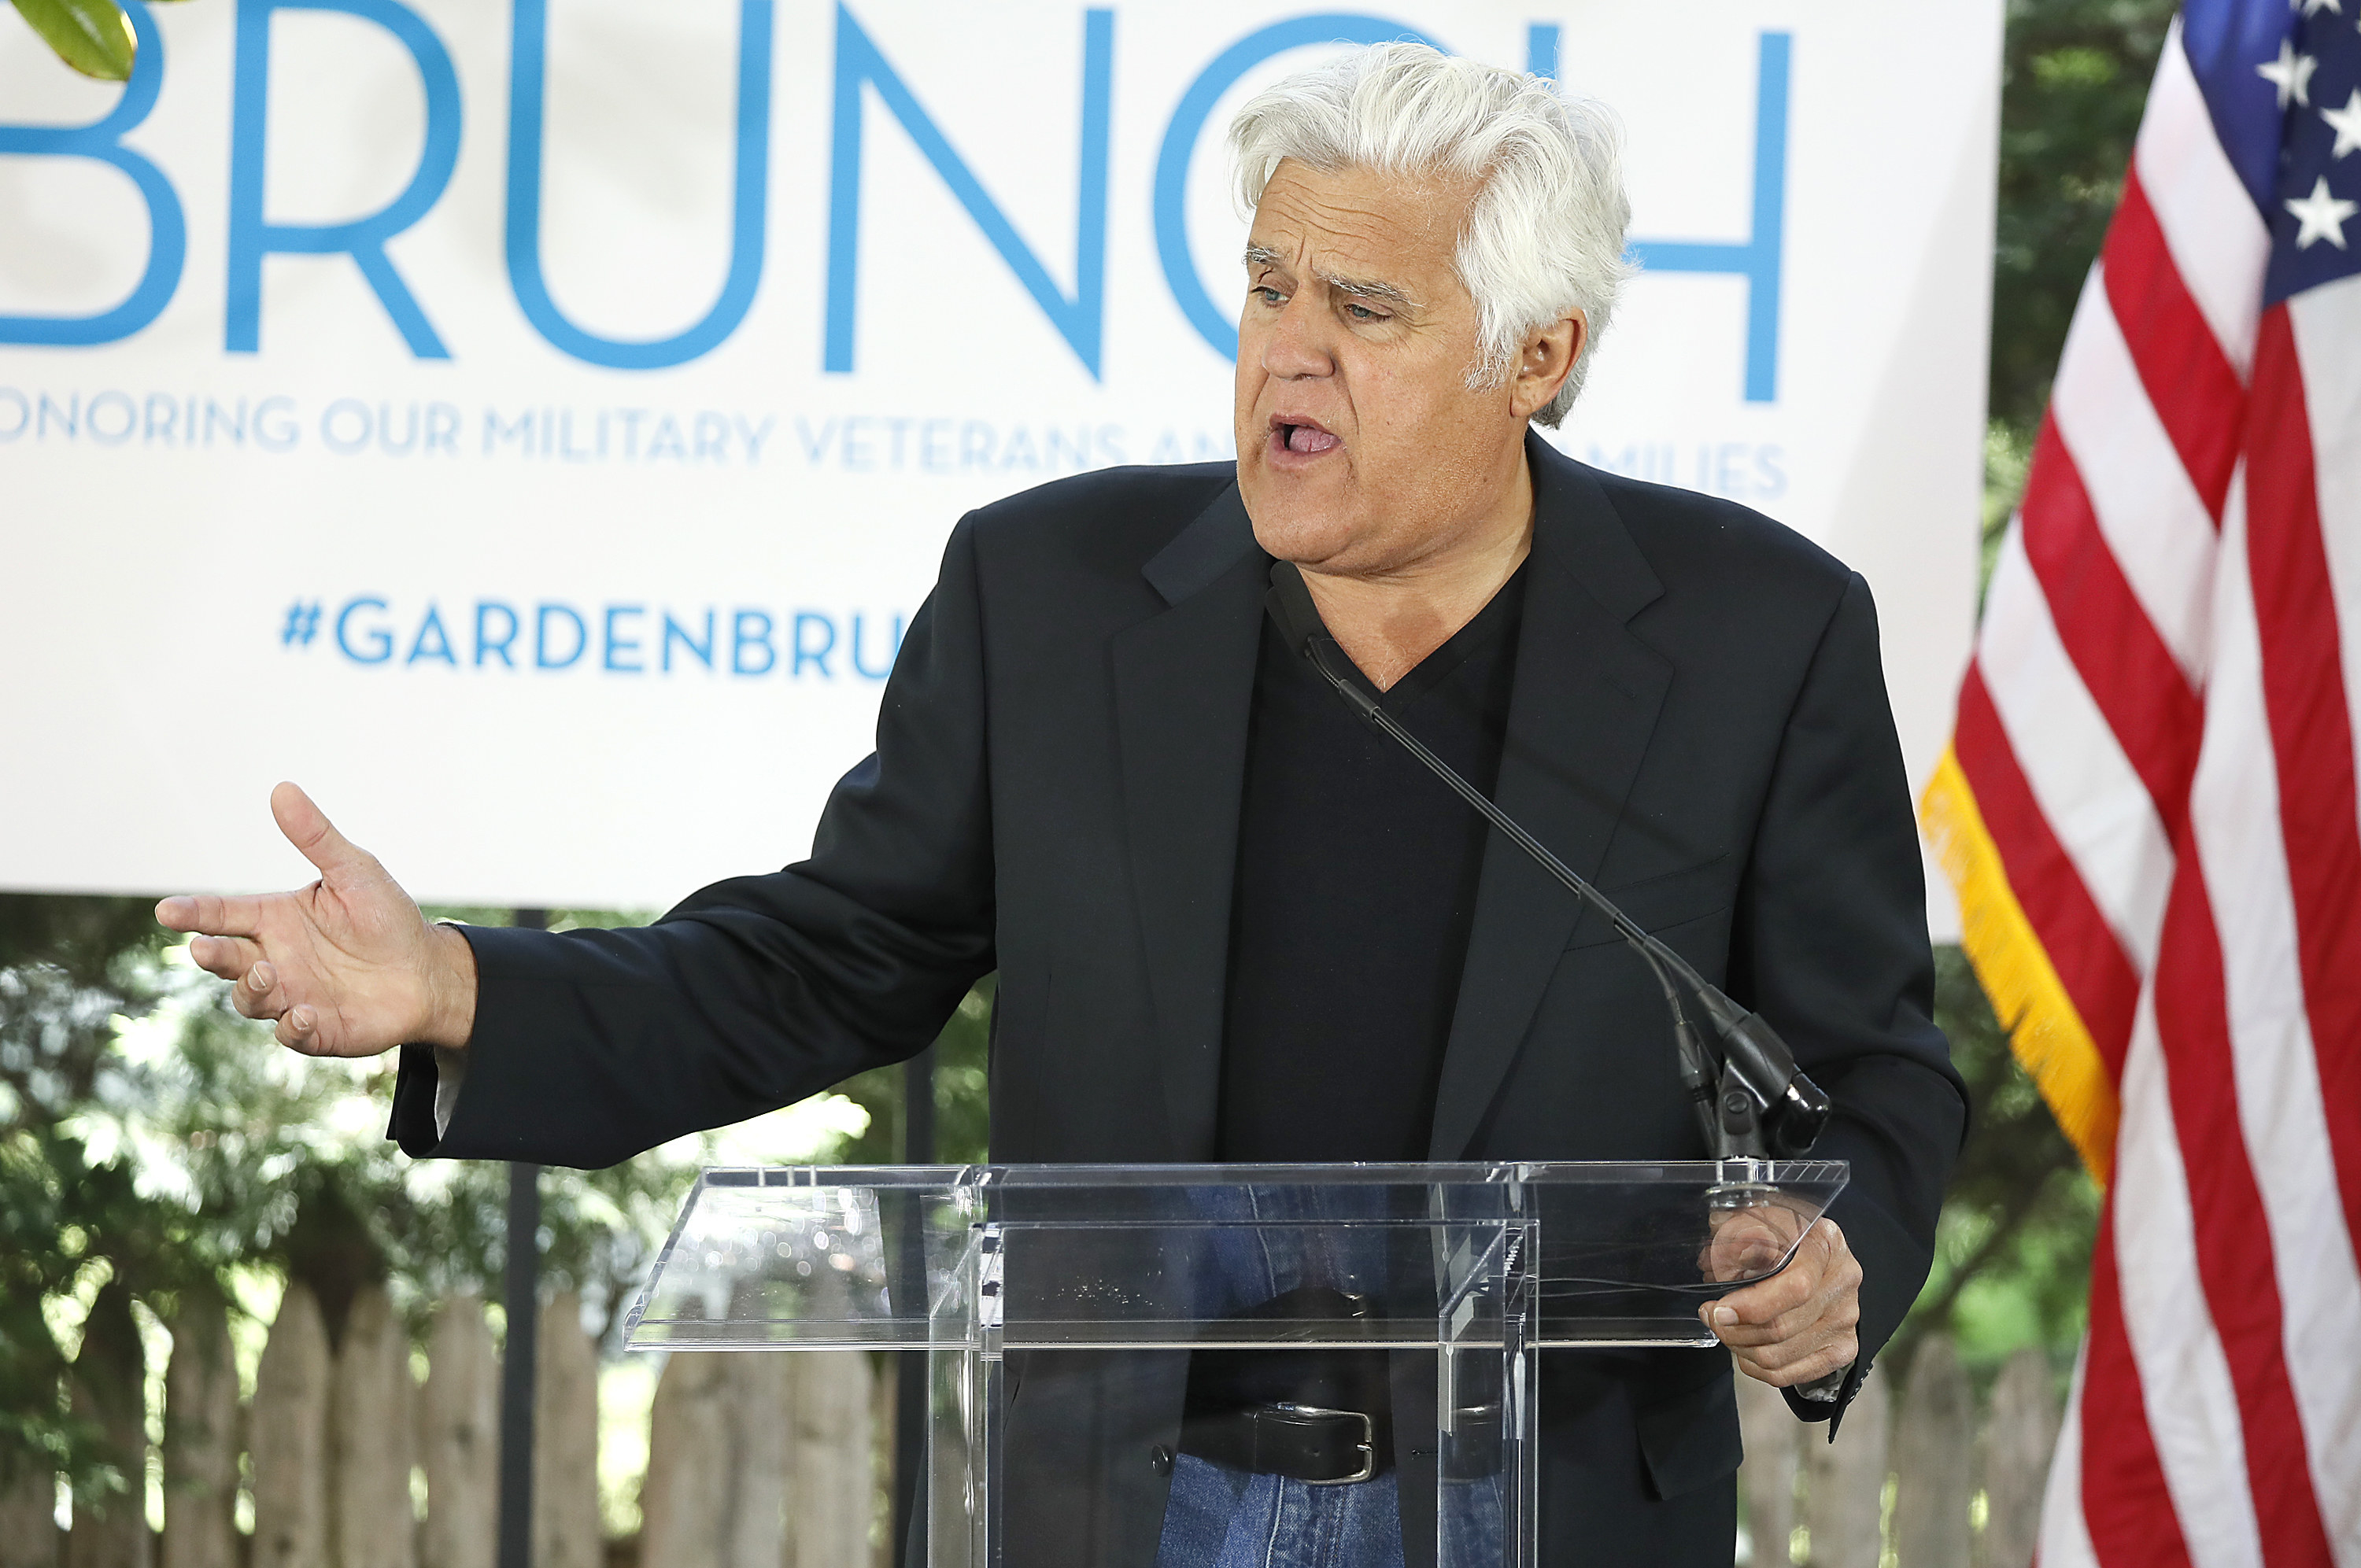 Jay Leno speaks at the 2019 White House Correspondents&#x27; Weekend Garden Brunch